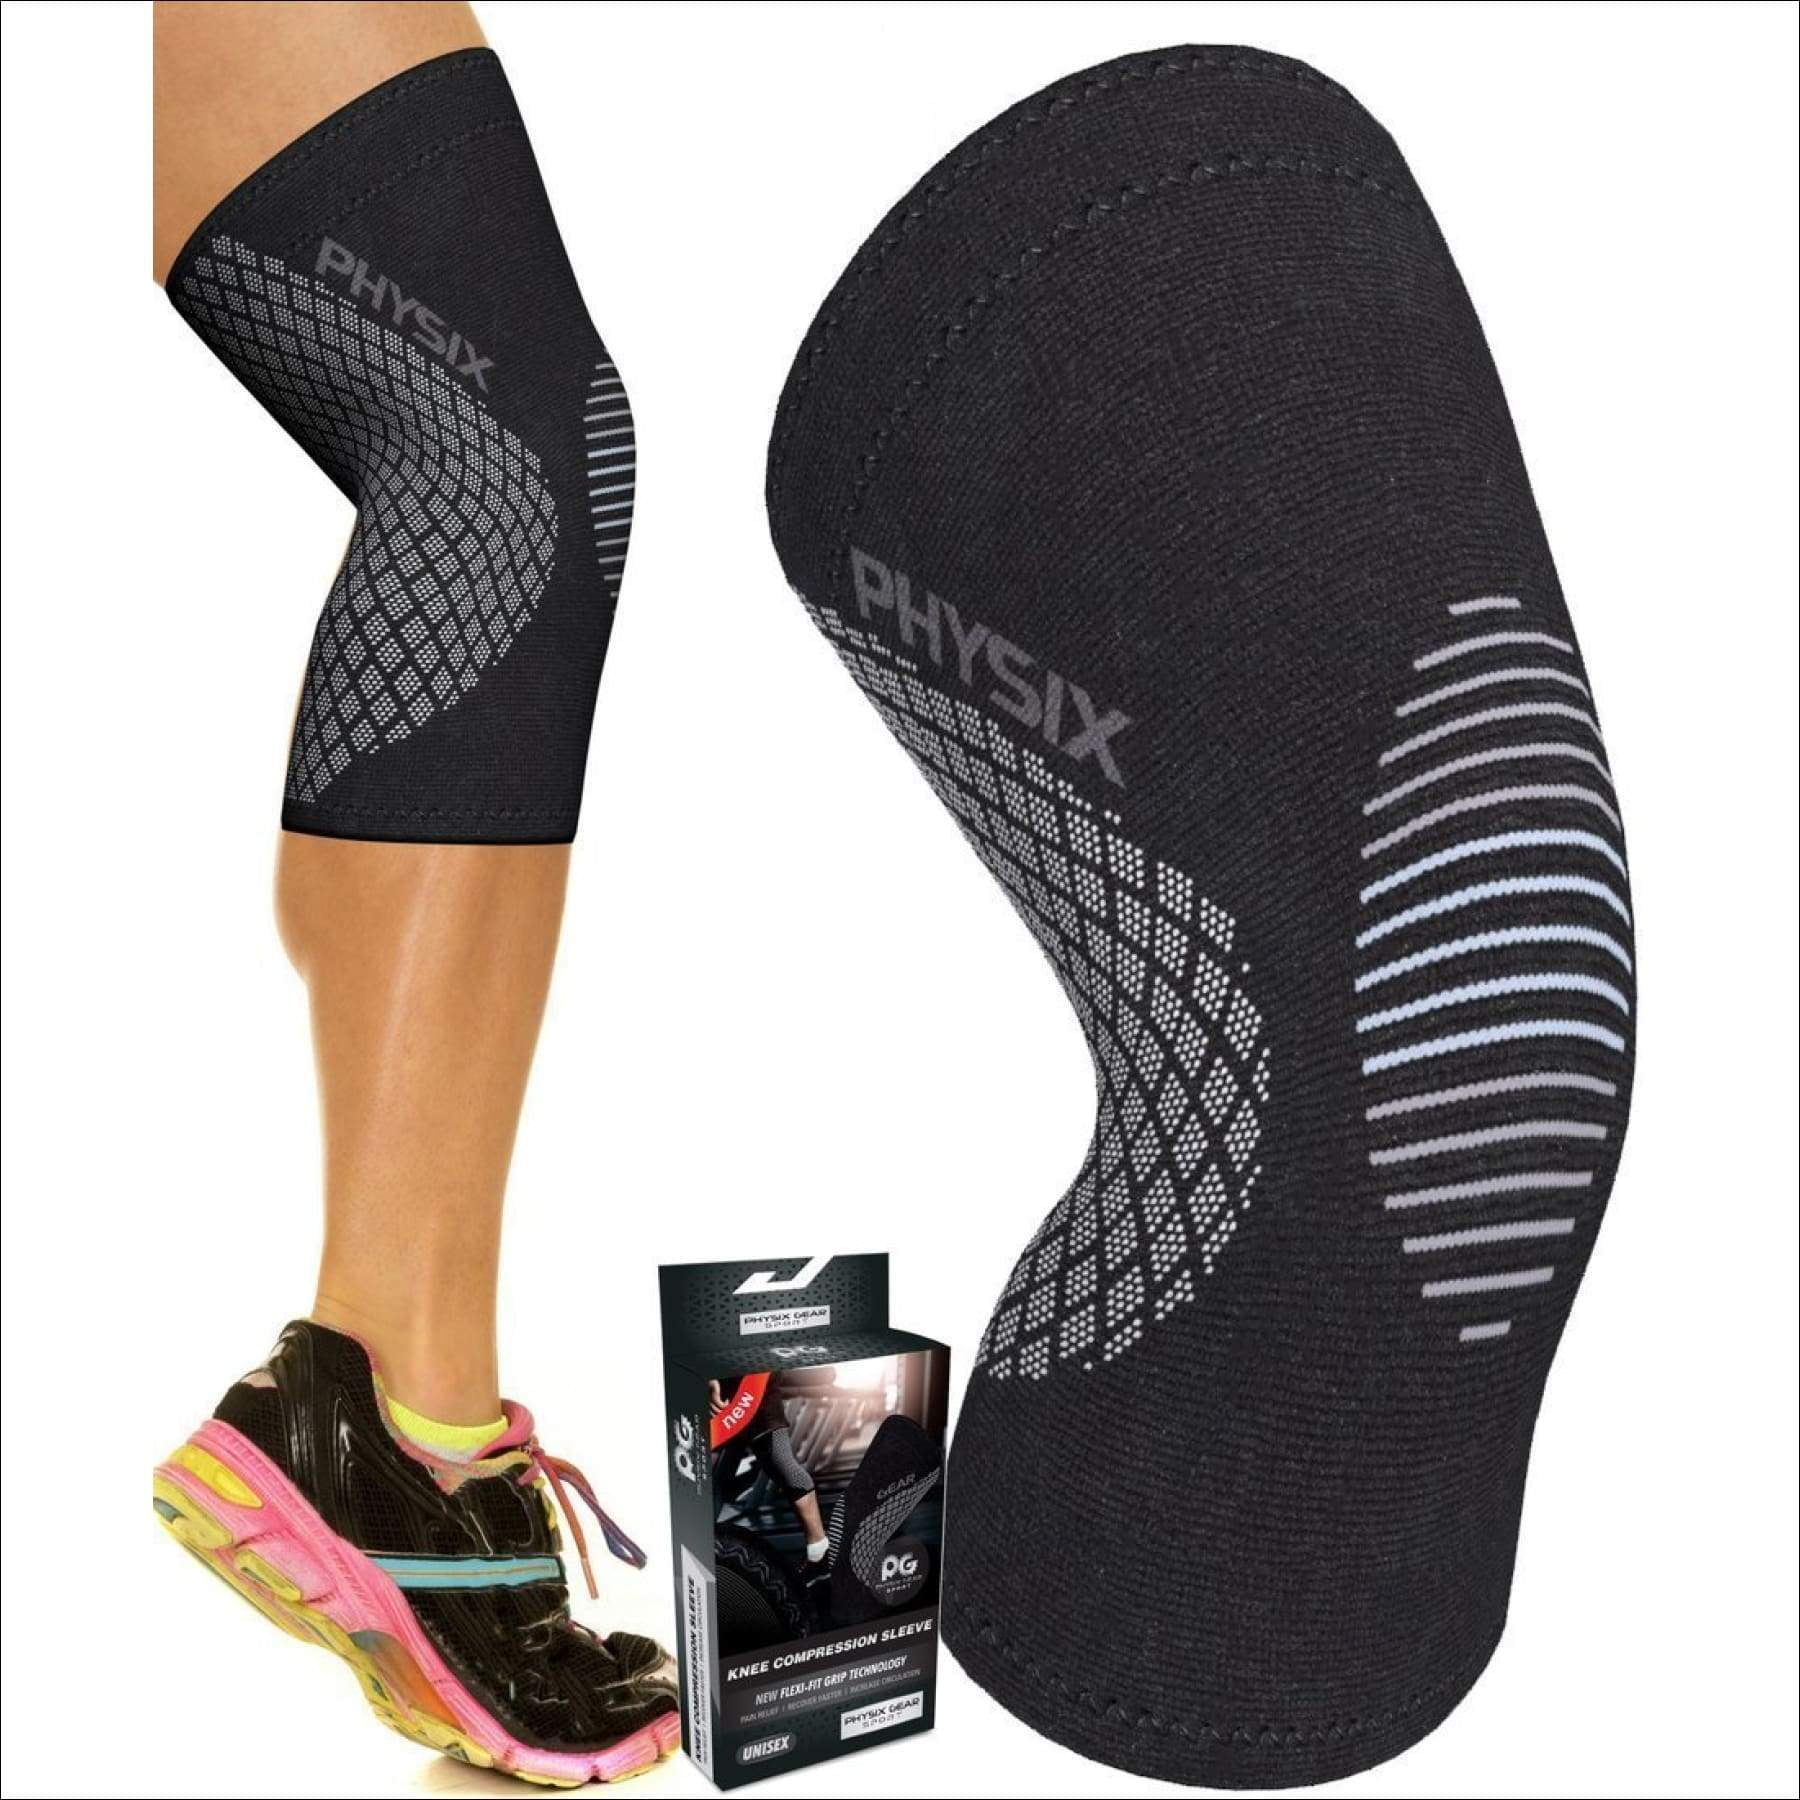 UFlex Athletics Capsaicin Medicated Knee Compression Sleeve for Pain Relief  - Hot Cold Muscle Cream Alternative Brace for Injury Recovery and Sports  Performance